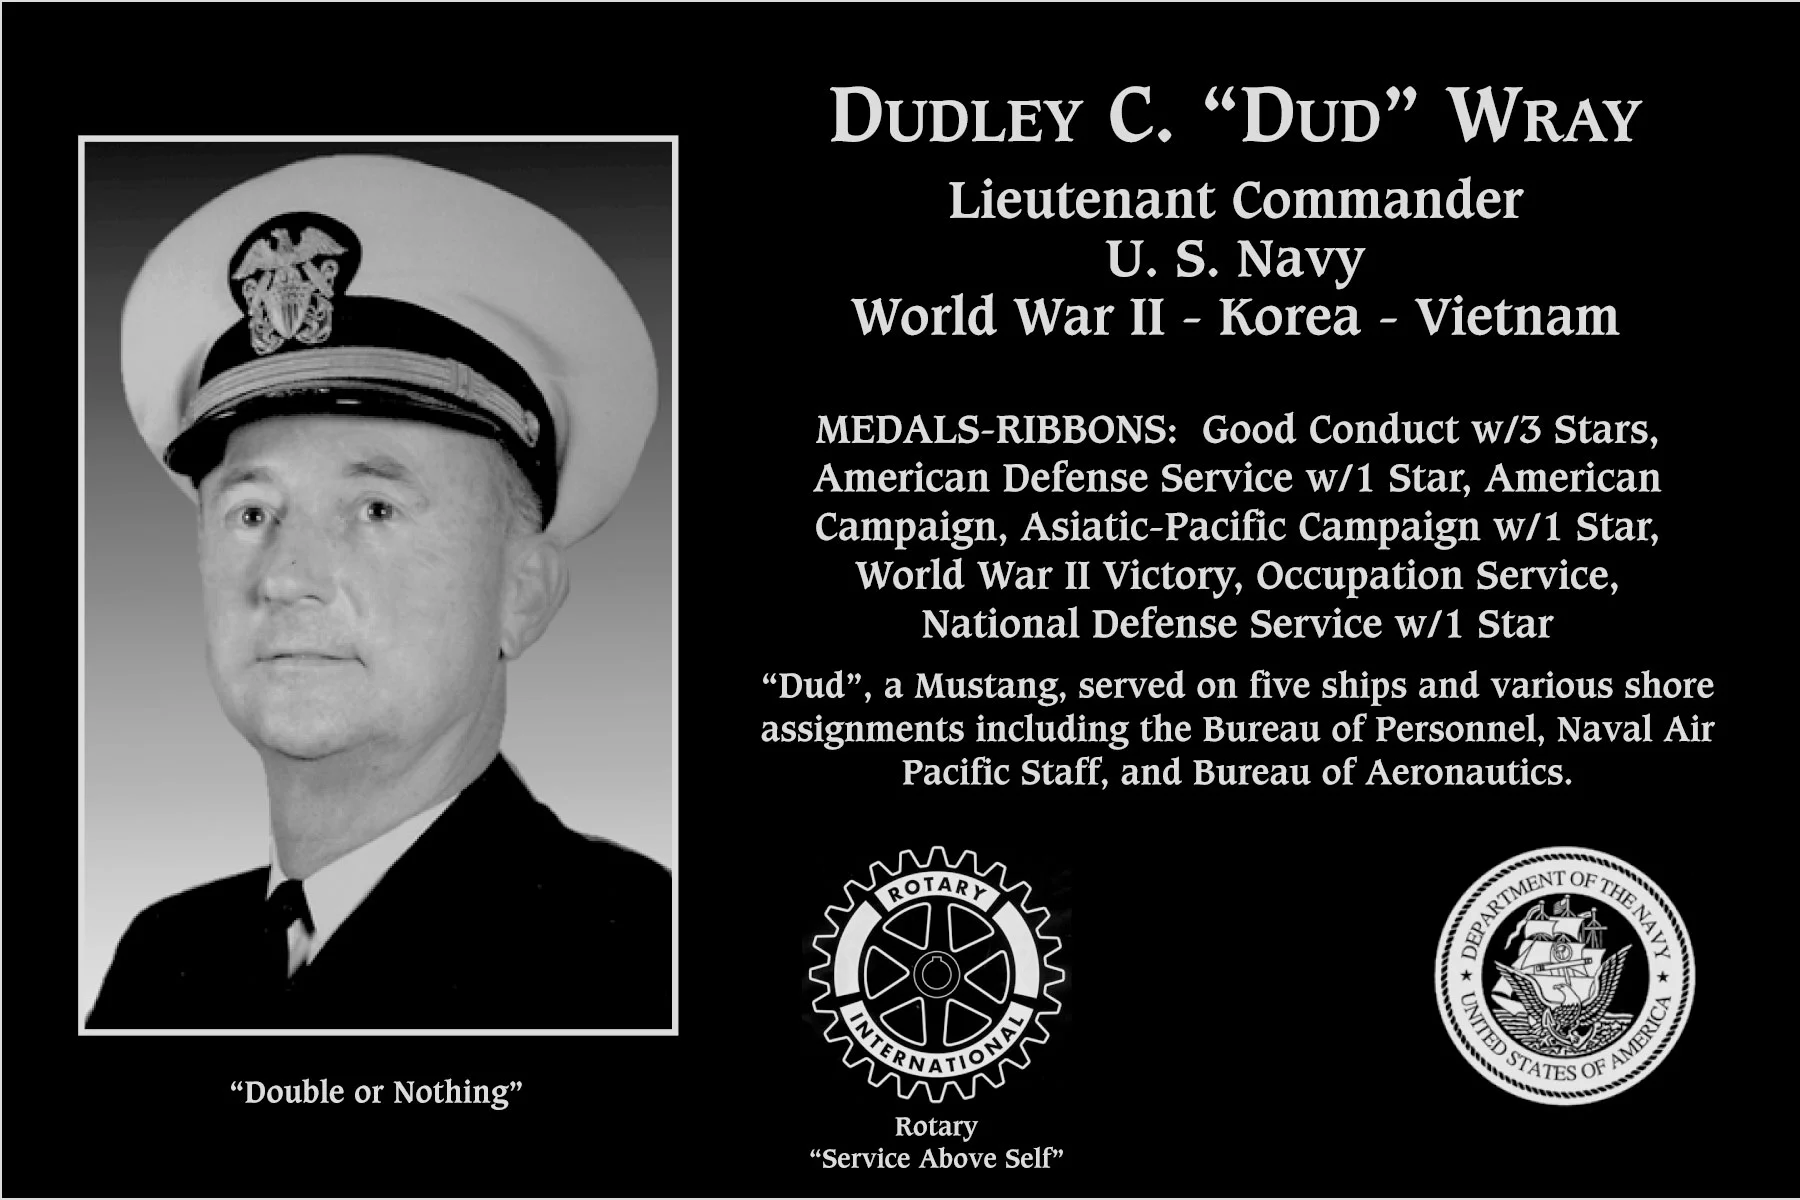 Dudley C “Dud” Wray